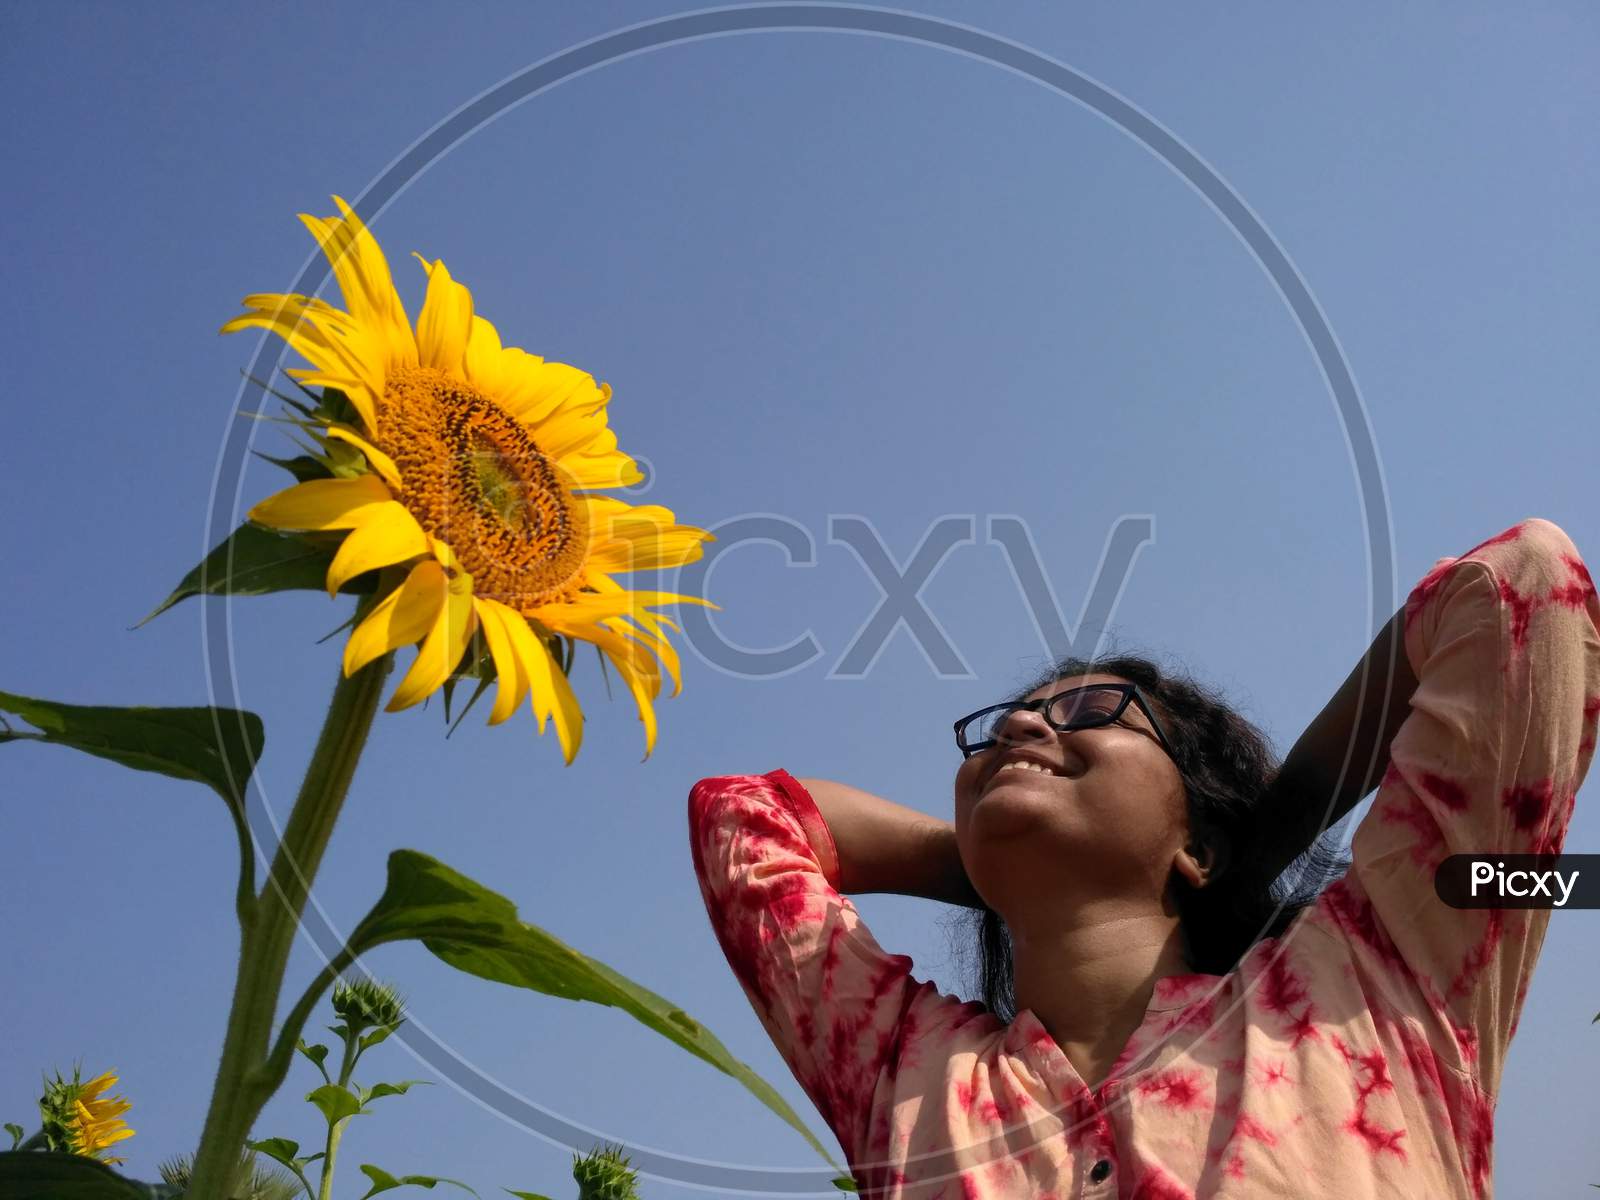 A Smiling Young Lady In A Sunflower Garden